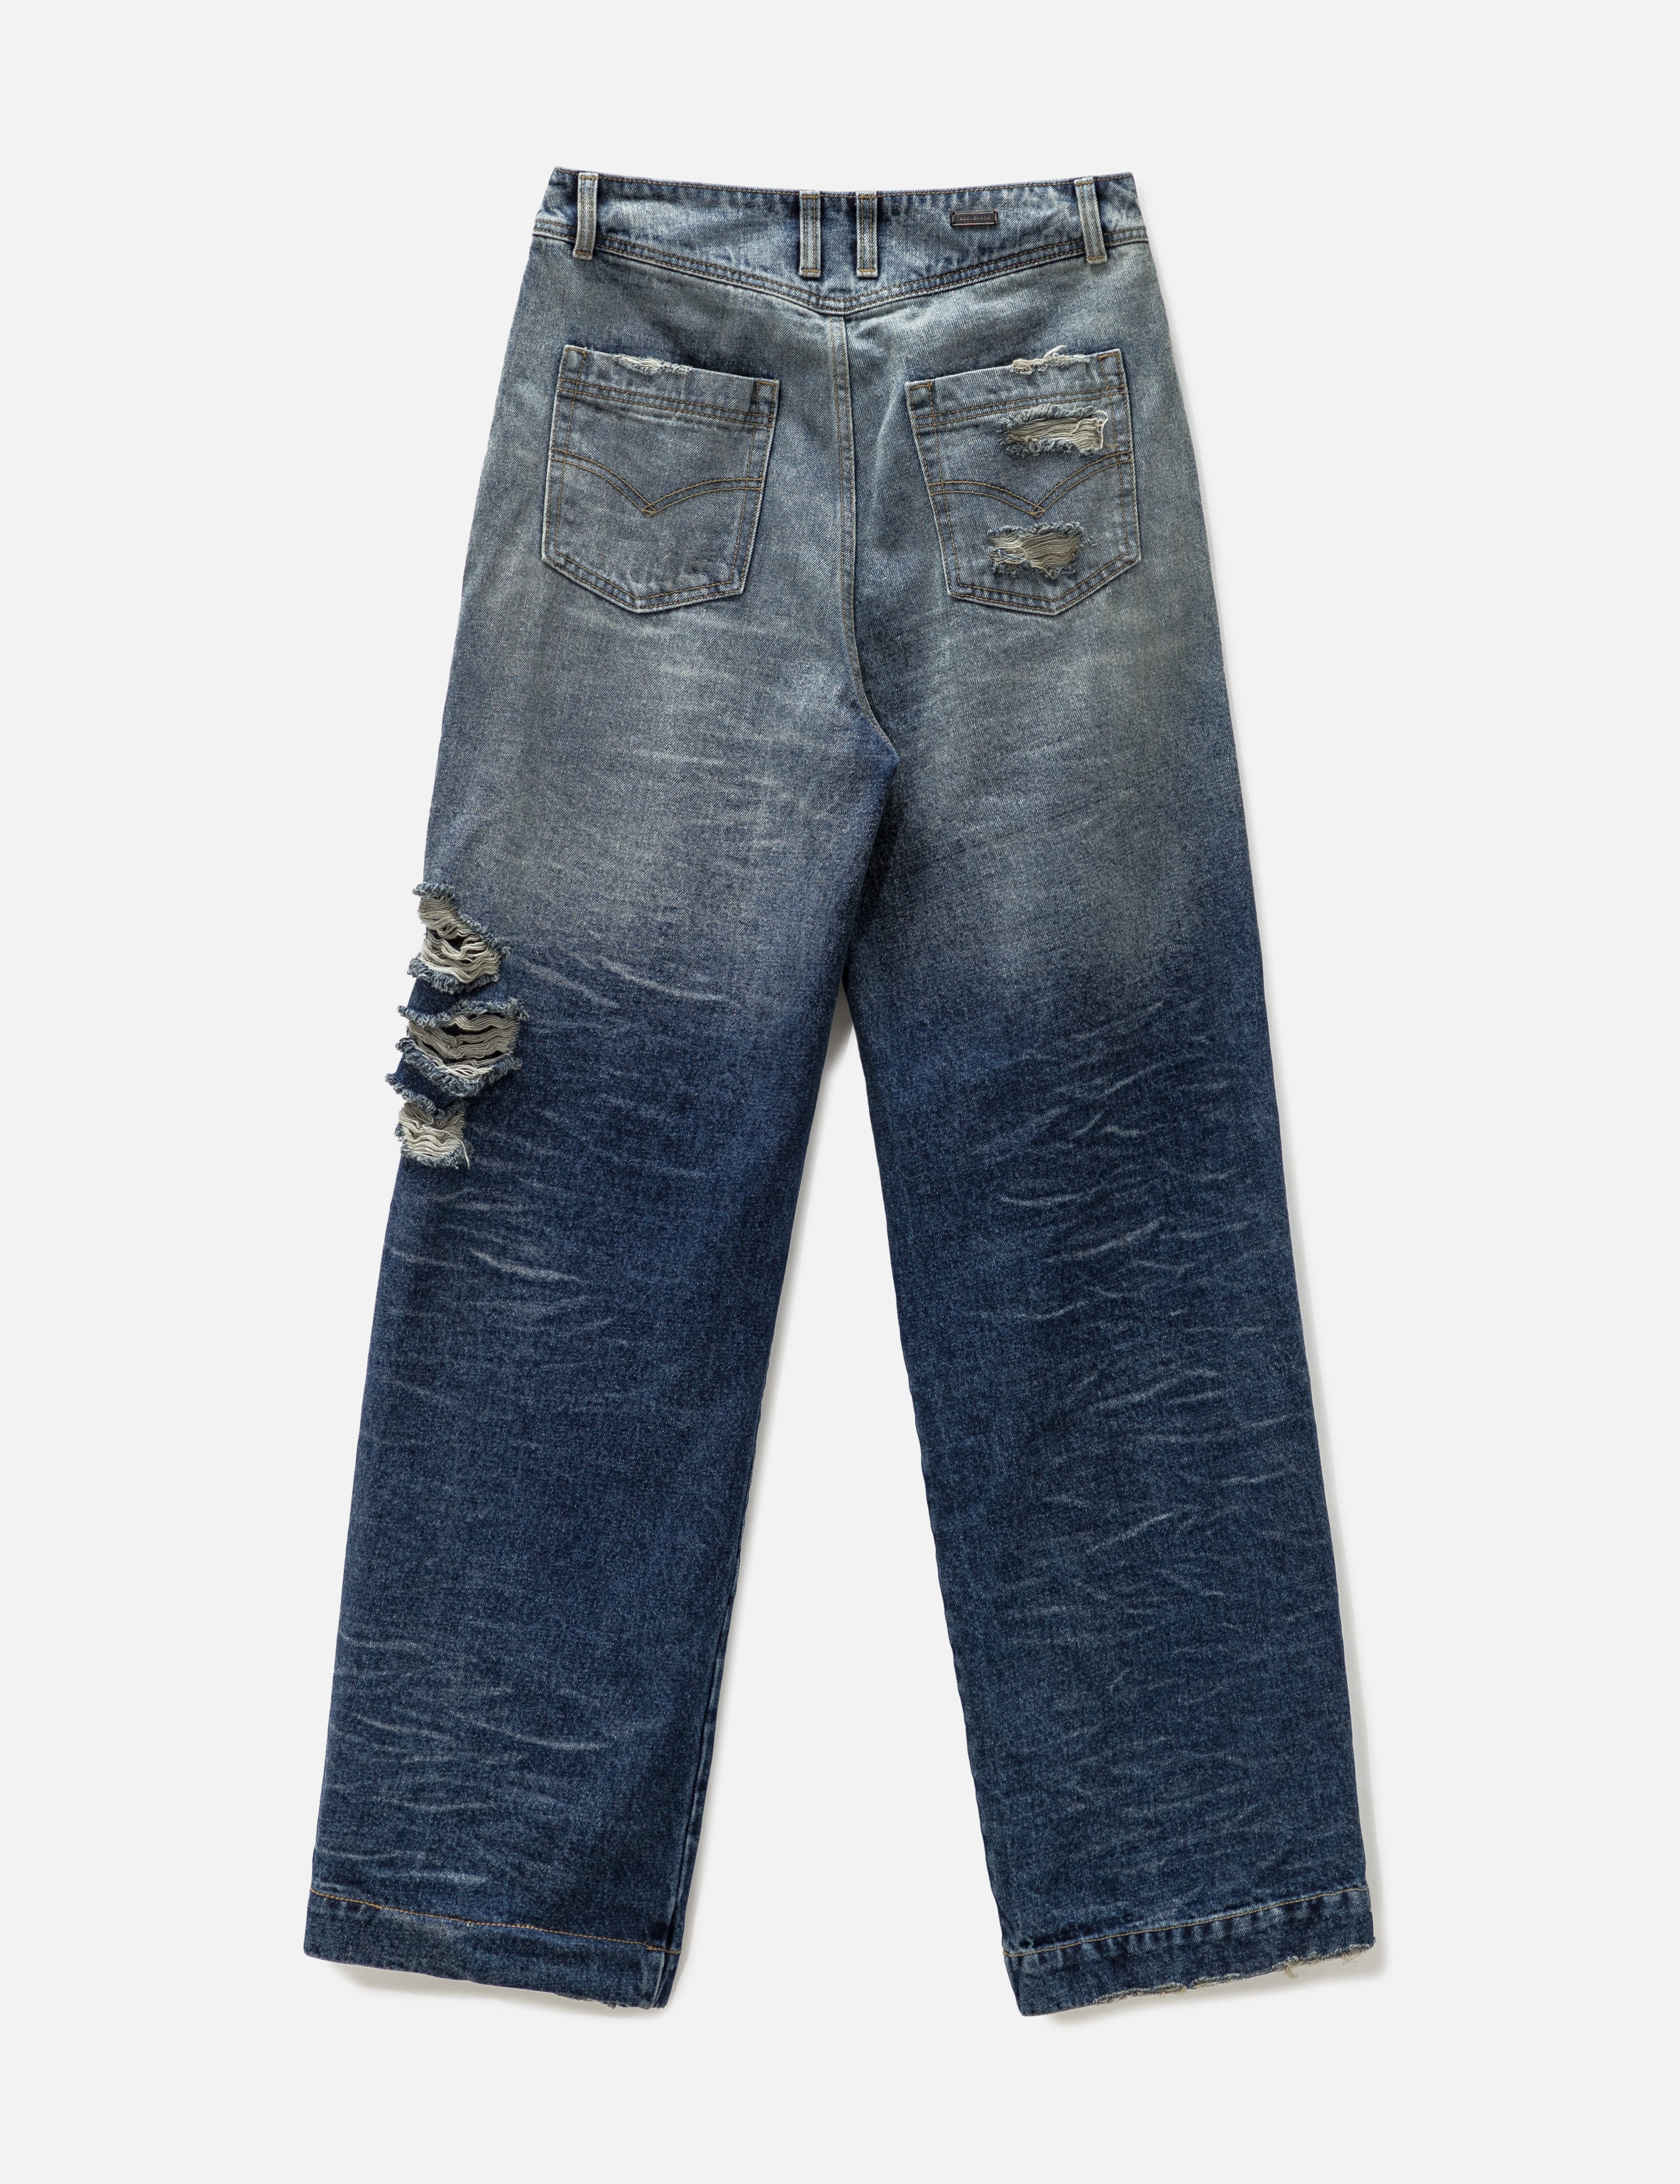 Ader Error - WIDE WRINKLE JEANS | HBX - Globally Curated Fashion